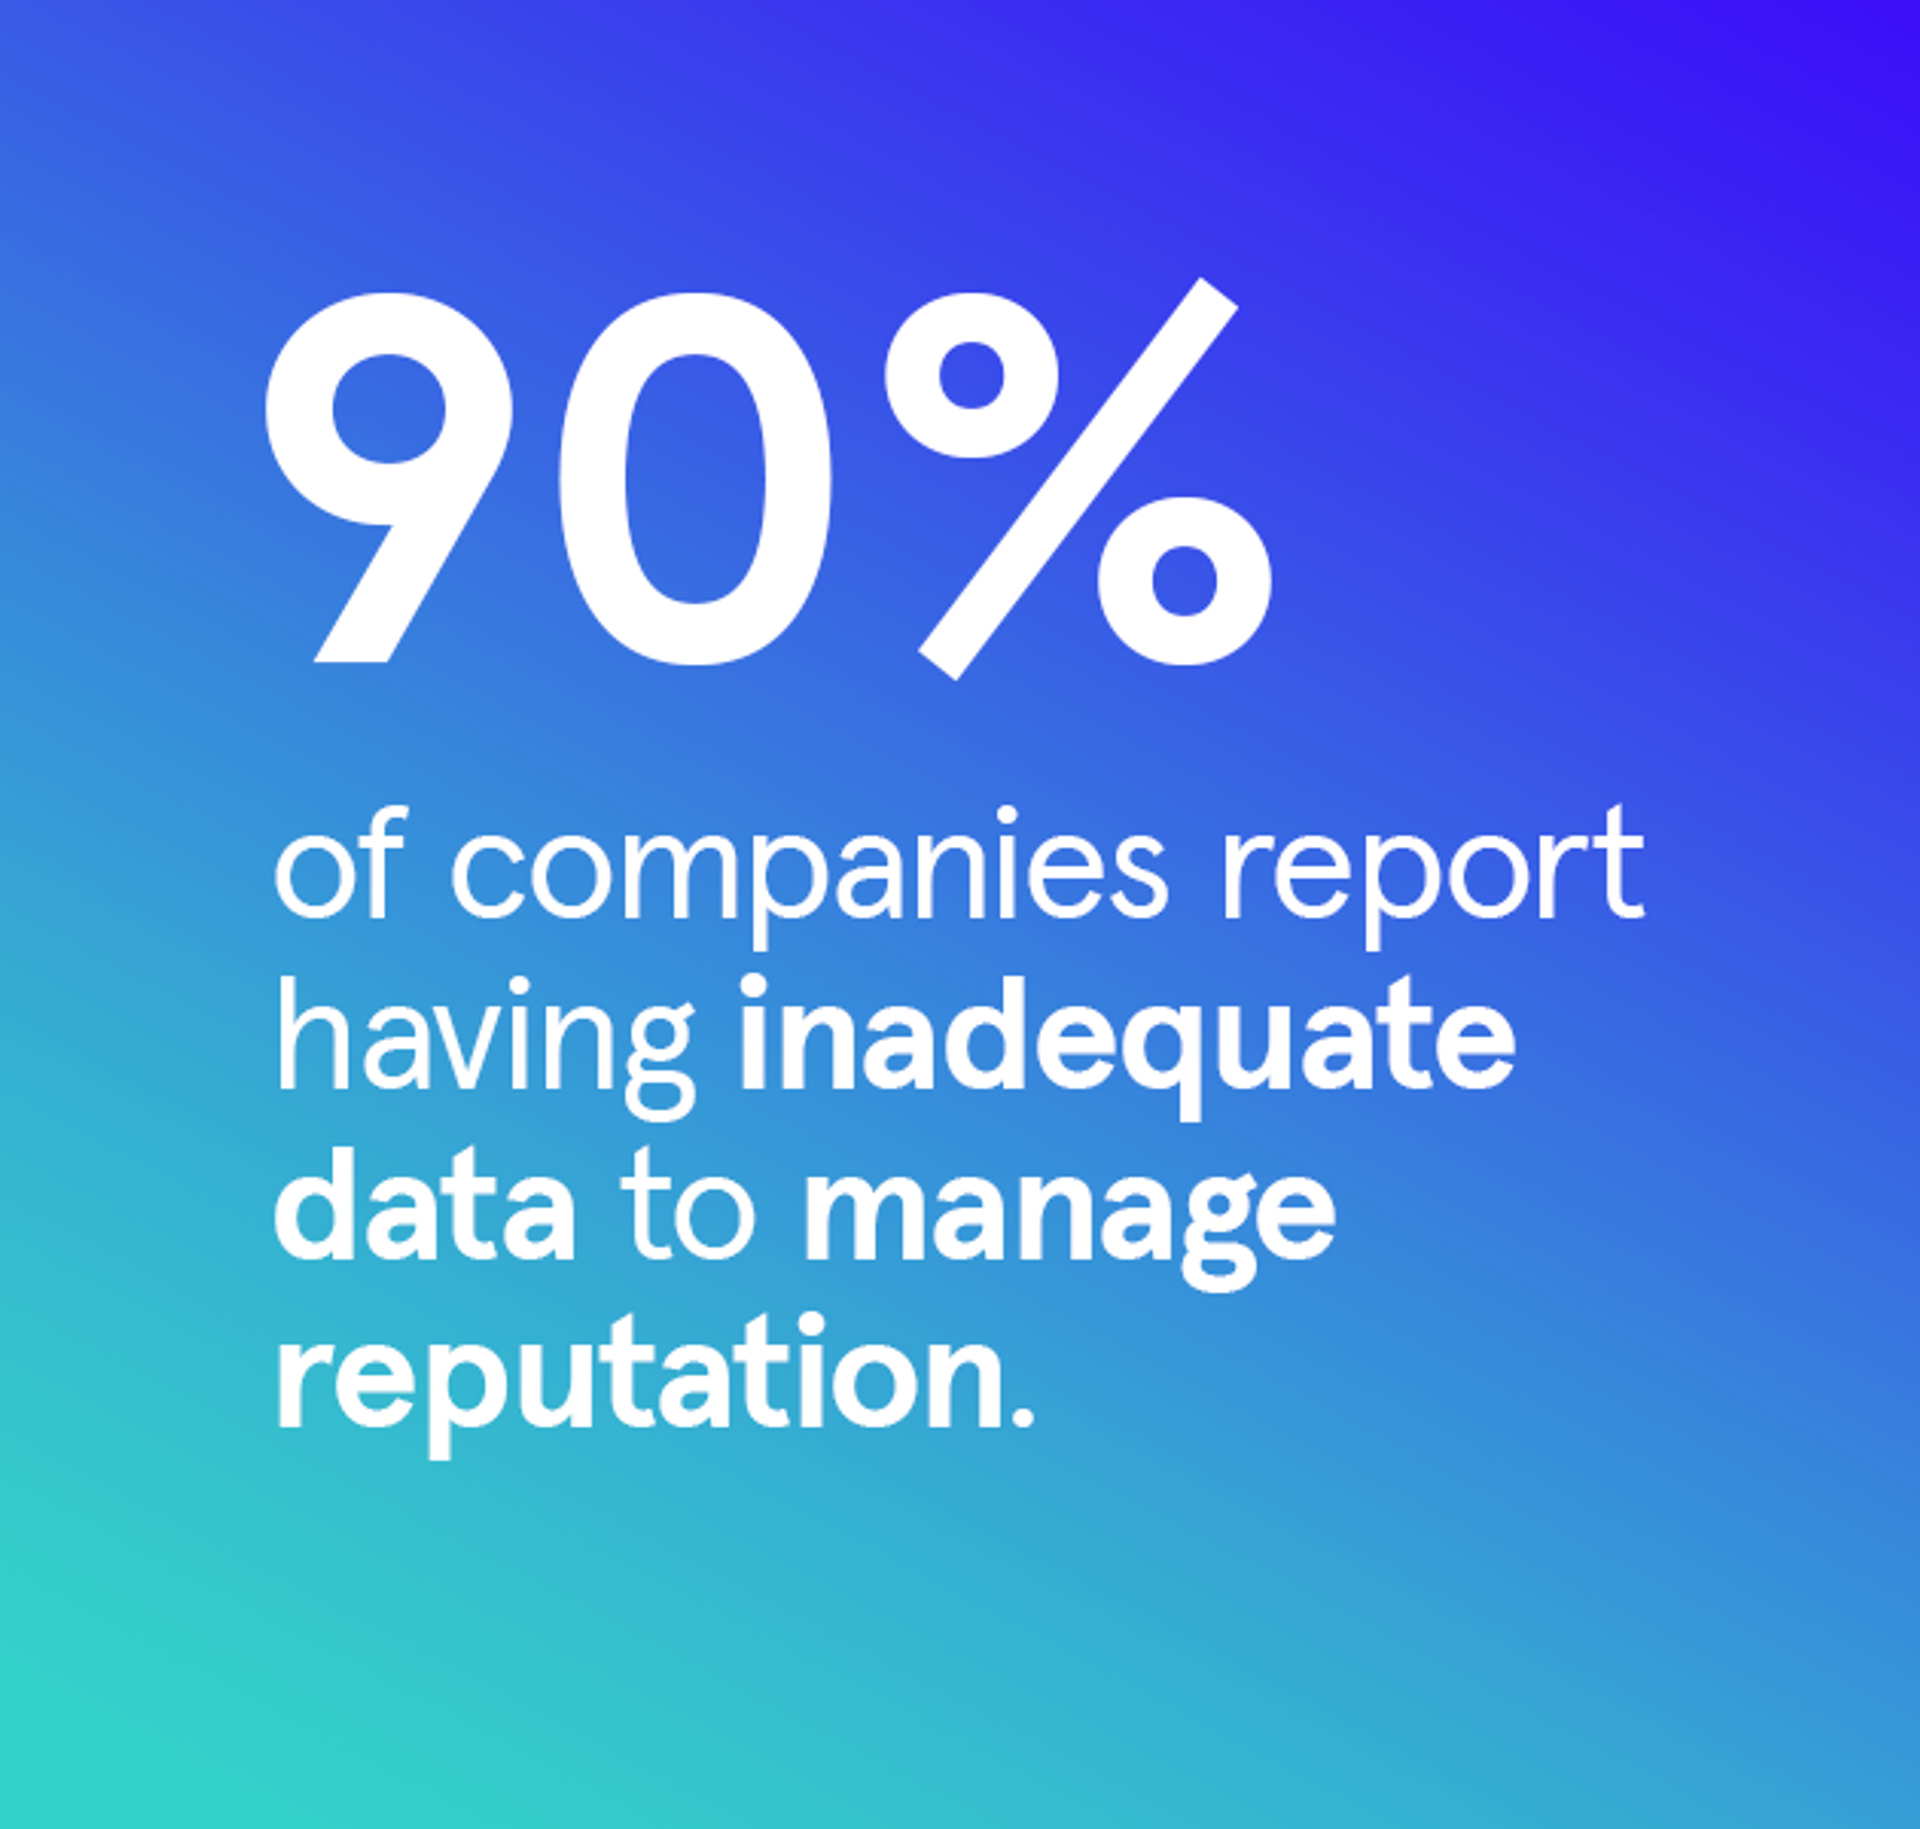 Infographic stating: 90% of companies report having inadequate data to manage reputation